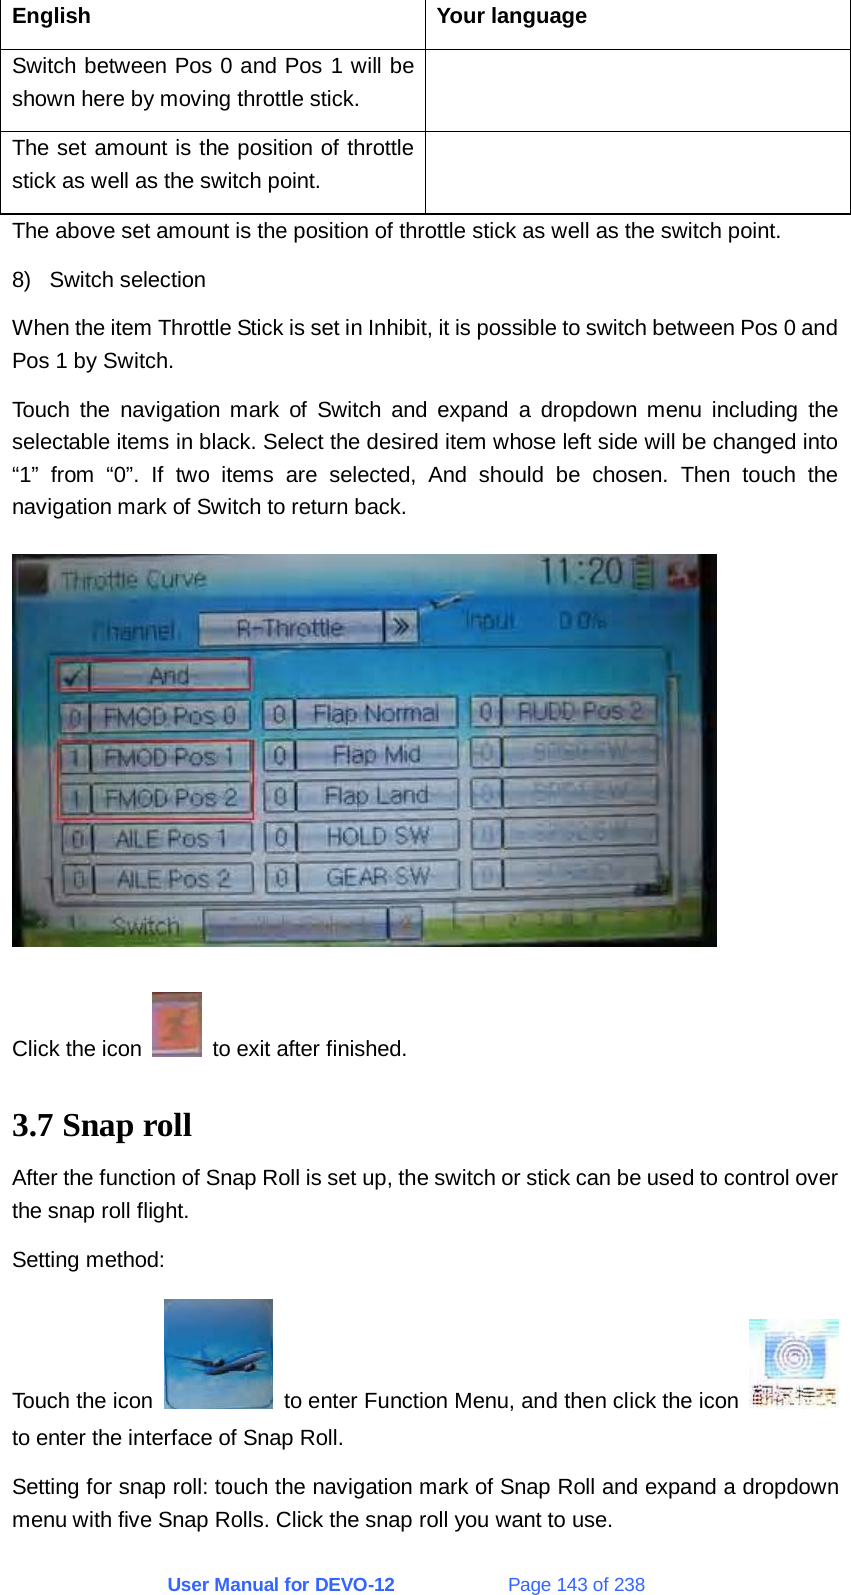 User Manual for DEVO-12             Page 143 of 238 English Your language Switch between Pos 0 and Pos 1 will be shown here by moving throttle stick.  The set amount is the position of throttle stick as well as the switch point.  The above set amount is the position of throttle stick as well as the switch point. 8) Switch selection When the item Throttle Stick is set in Inhibit, it is possible to switch between Pos 0 and Pos 1 by Switch. Touch the navigation mark of Switch and expand a dropdown menu including the selectable items in black. Select the desired item whose left side will be changed into “1” from “0”. If two items are selected, And should be chosen. Then touch the navigation mark of Switch to return back.  Click the icon    to exit after finished. 3.7 Snap roll After the function of Snap Roll is set up, the switch or stick can be used to control over the snap roll flight. Setting method: Touch the icon    to enter Function Menu, and then click the icon   to enter the interface of Snap Roll. Setting for snap roll: touch the navigation mark of Snap Roll and expand a dropdown menu with five Snap Rolls. Click the snap roll you want to use. 